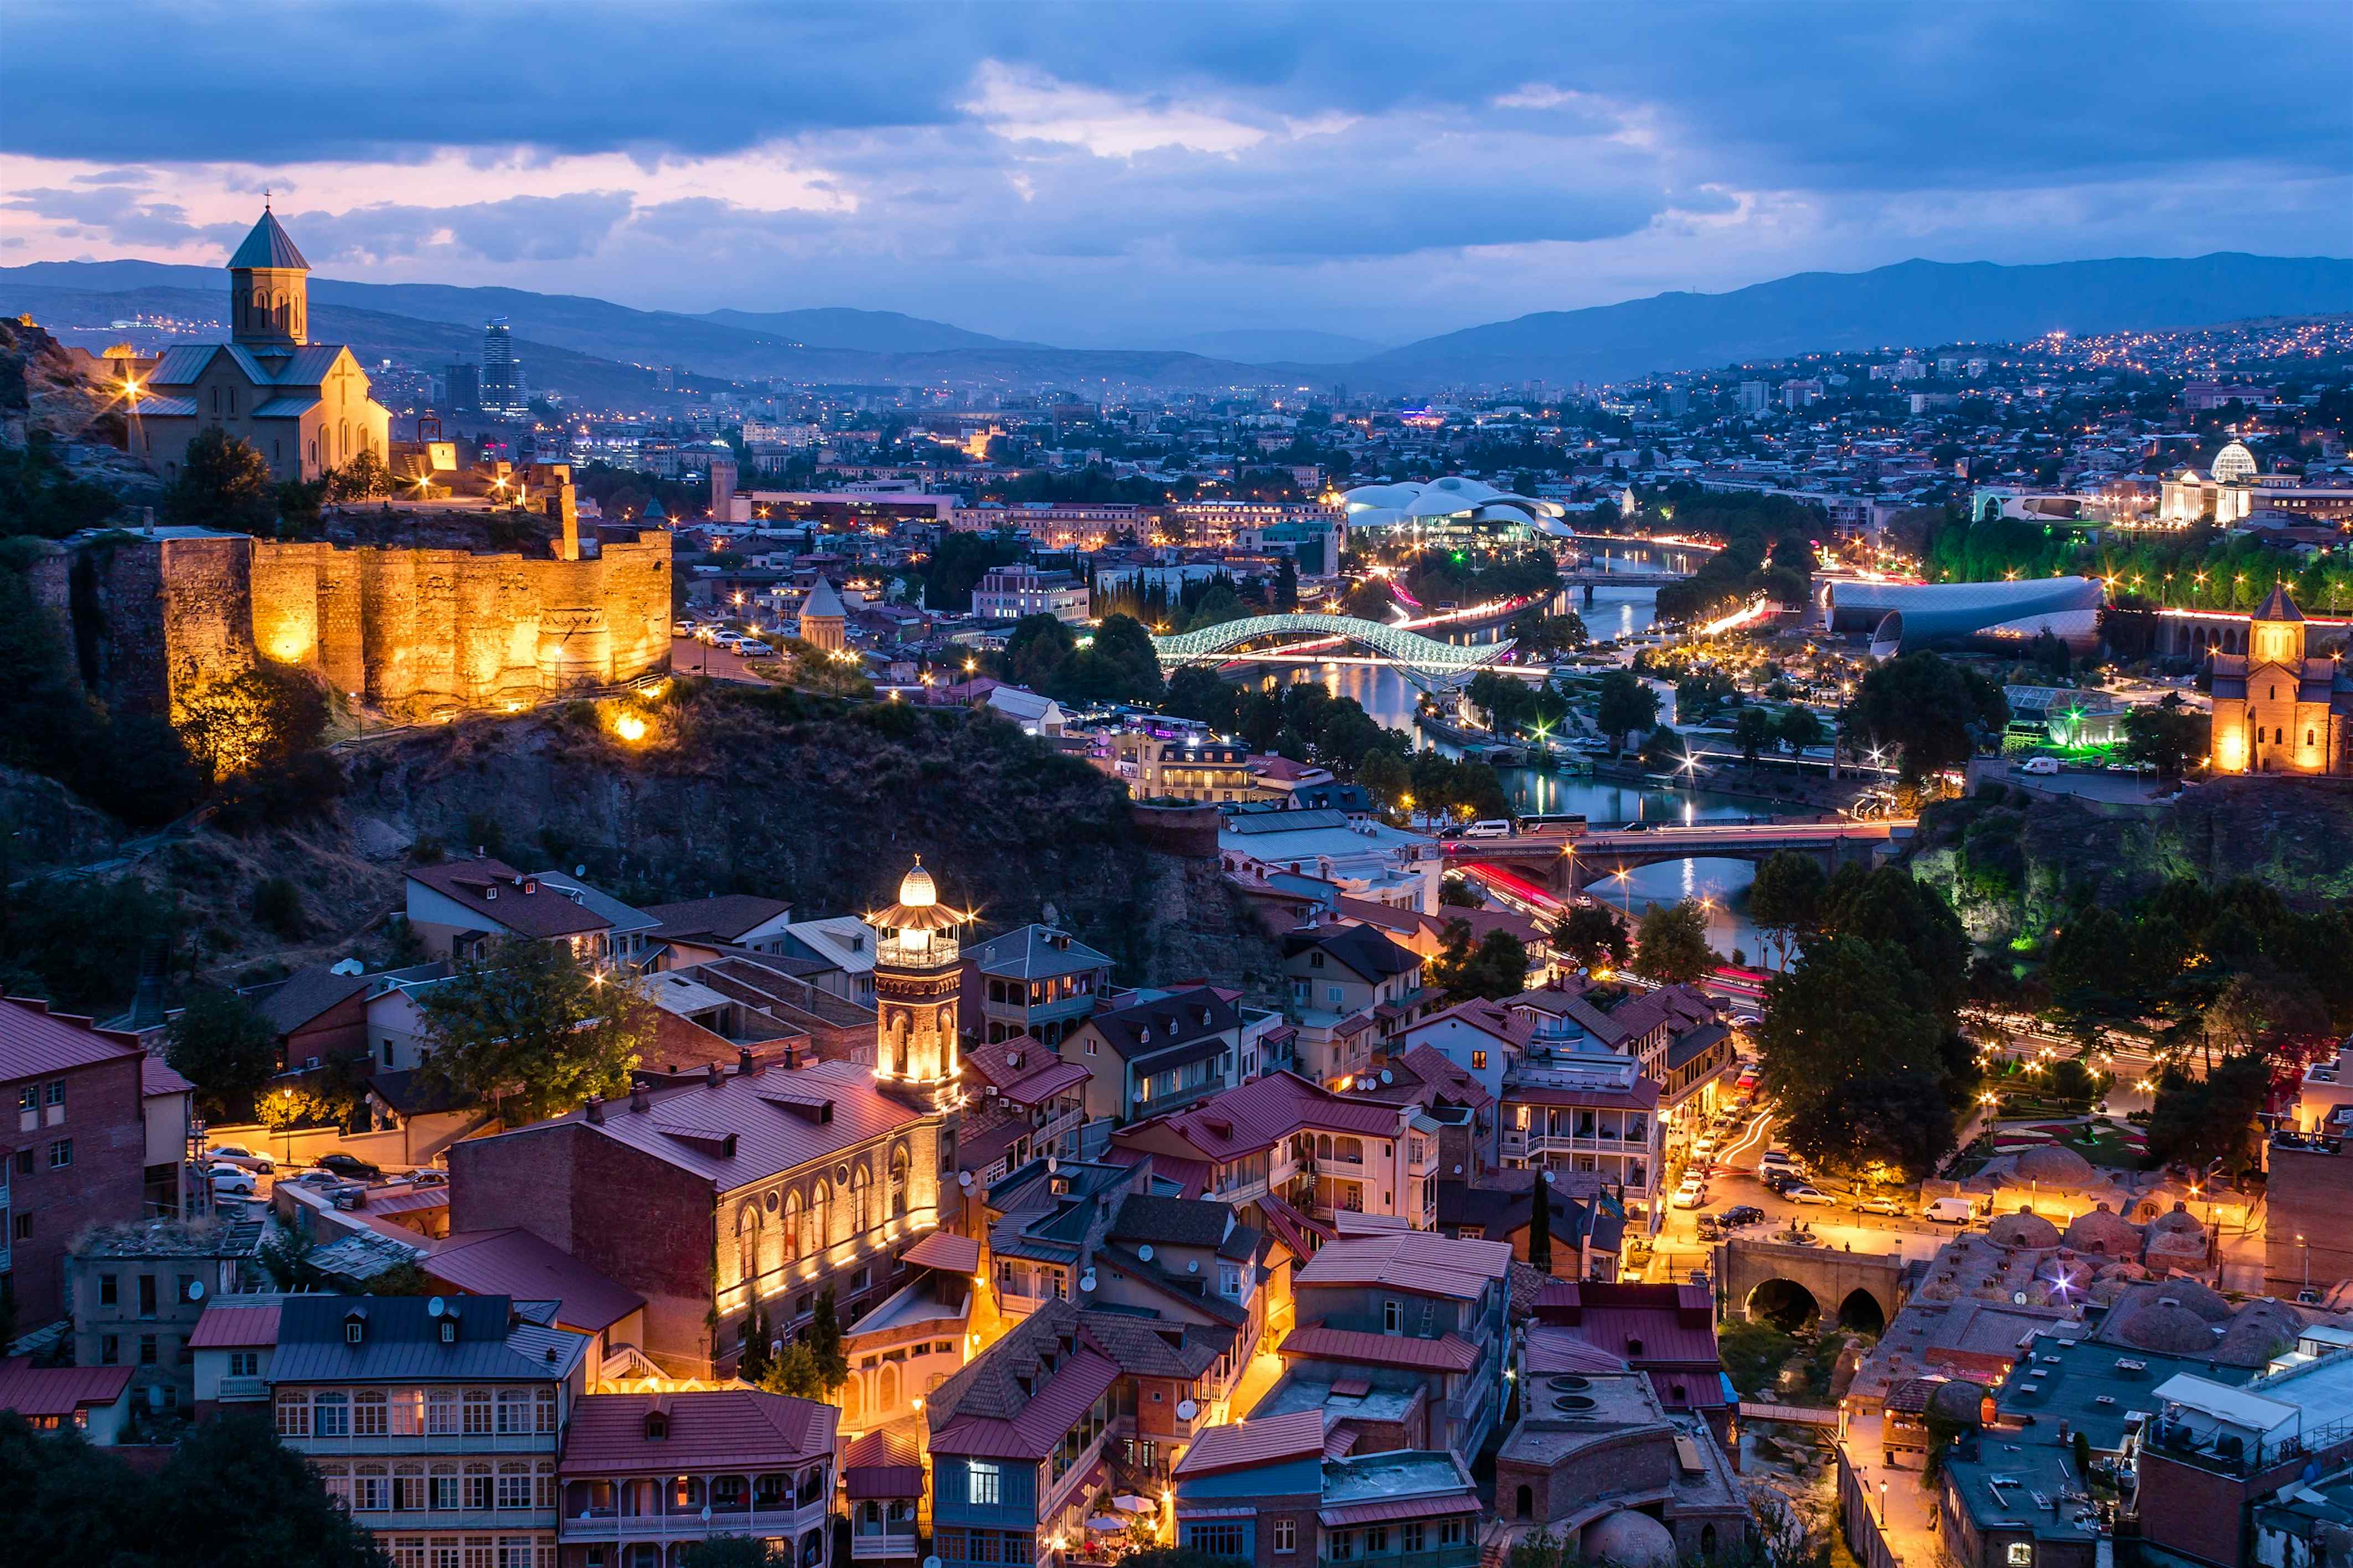 places to visit in tbilisi in february